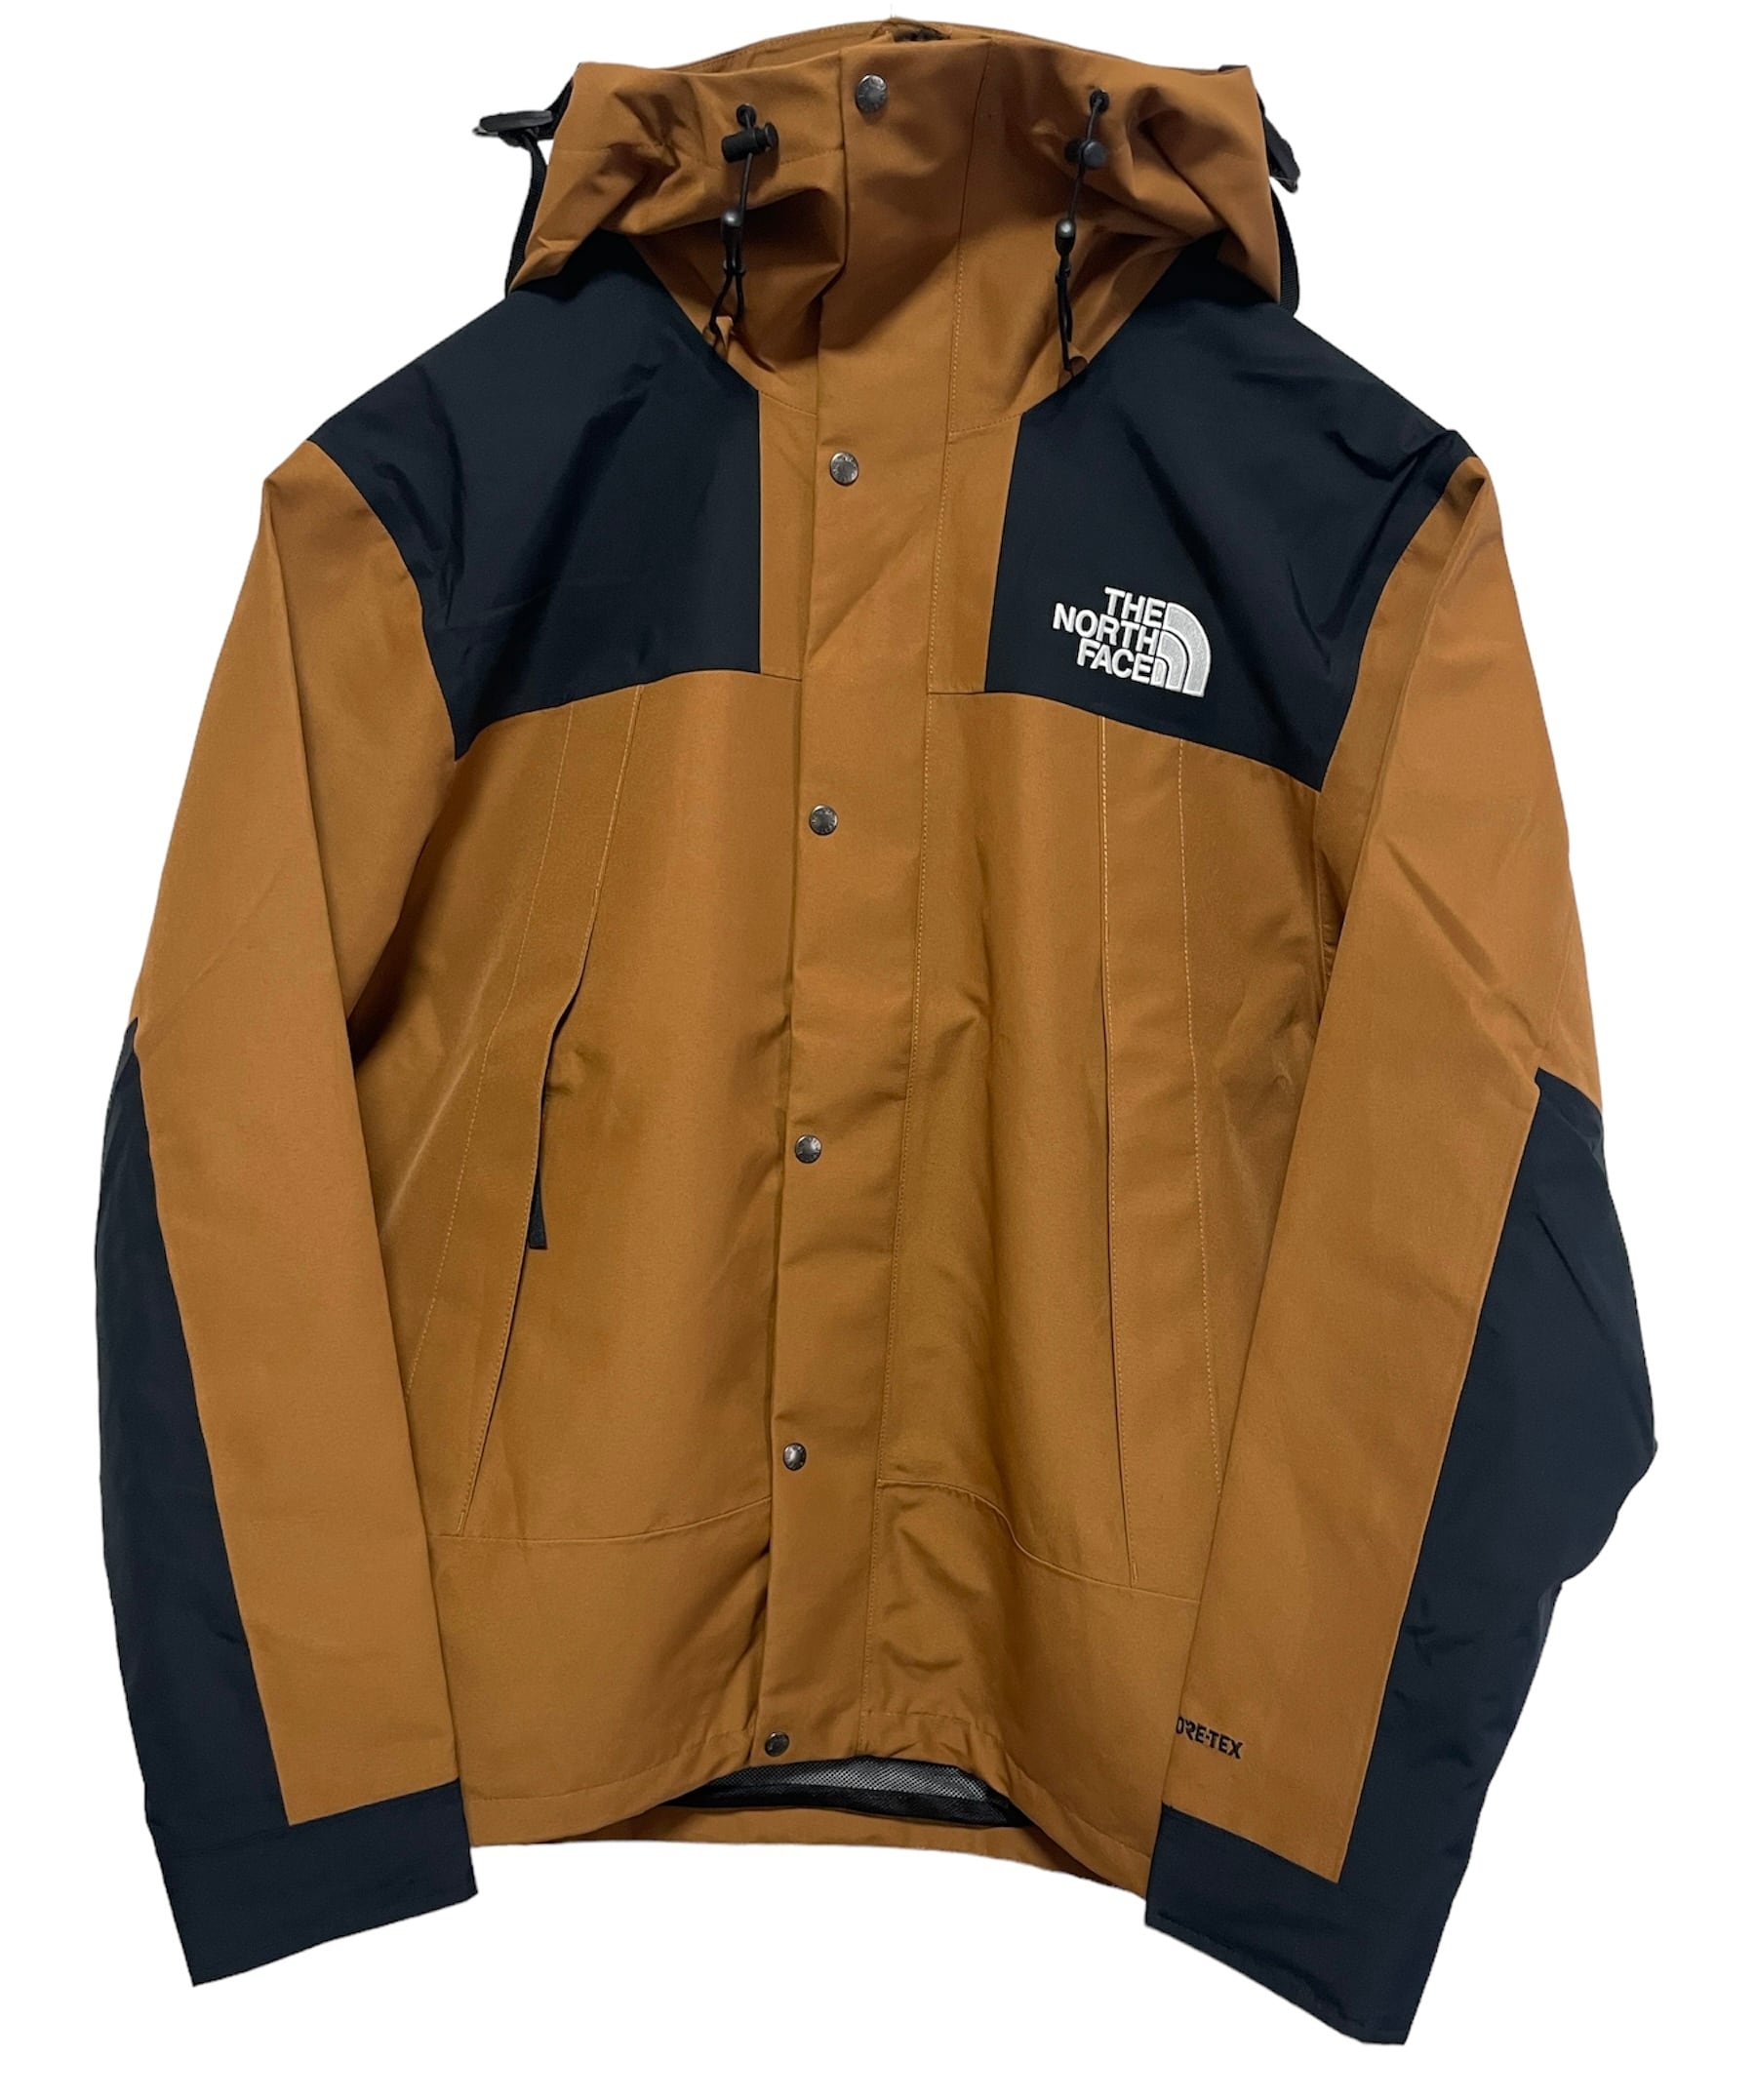 THE NORTH FACE - gore-tex 1990 mountain jacket (SIZE: XL